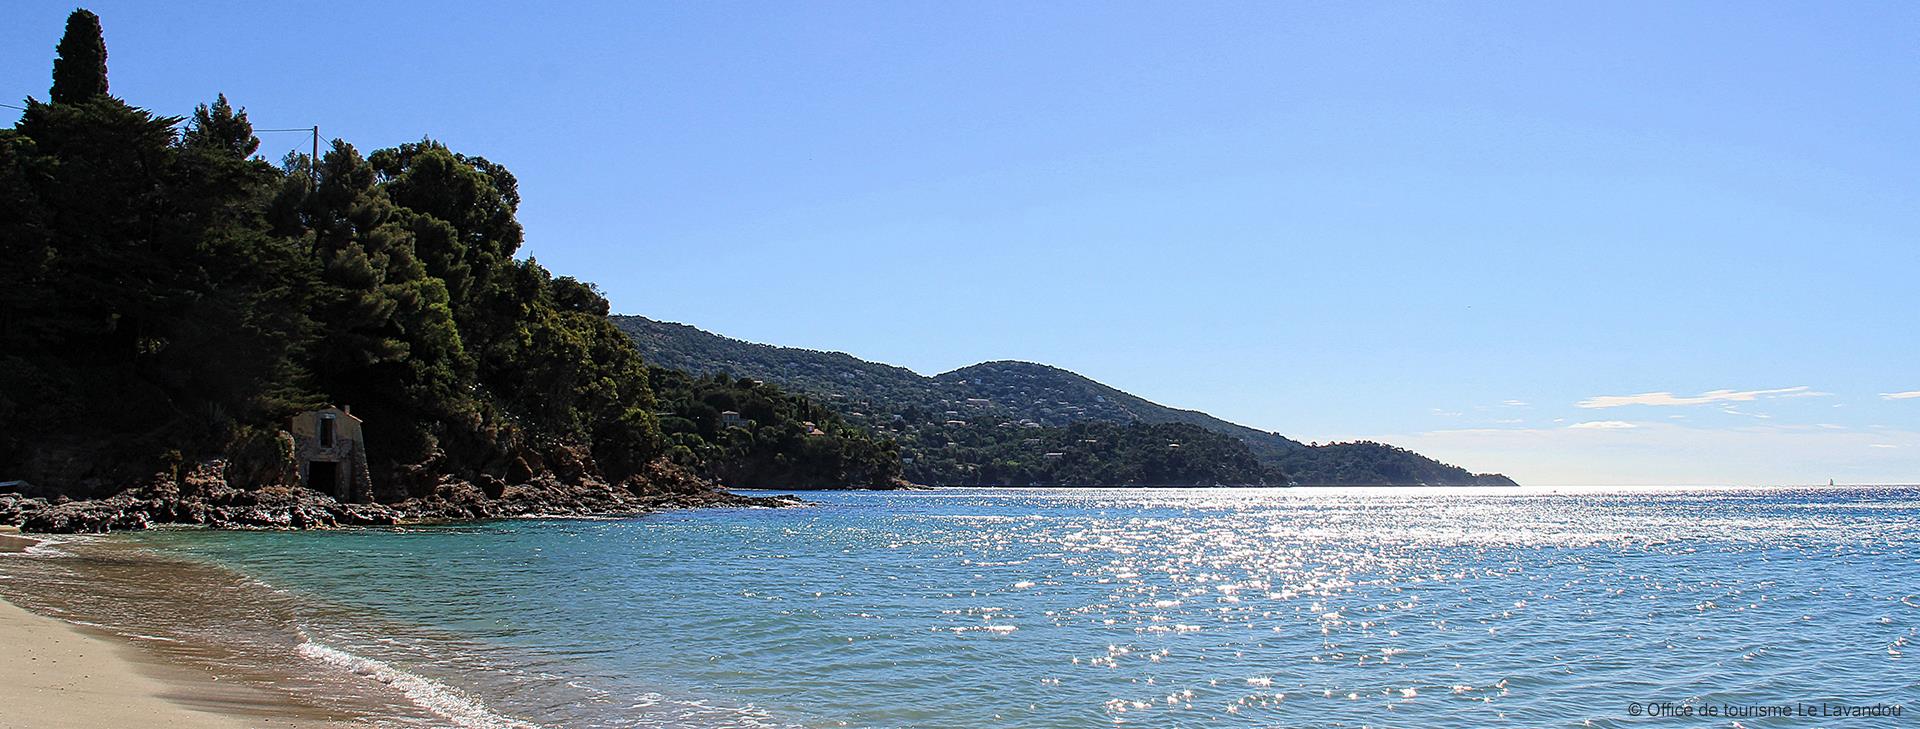 The beach at La Fossette: one of the most beautiful beaches on the Var coastline.